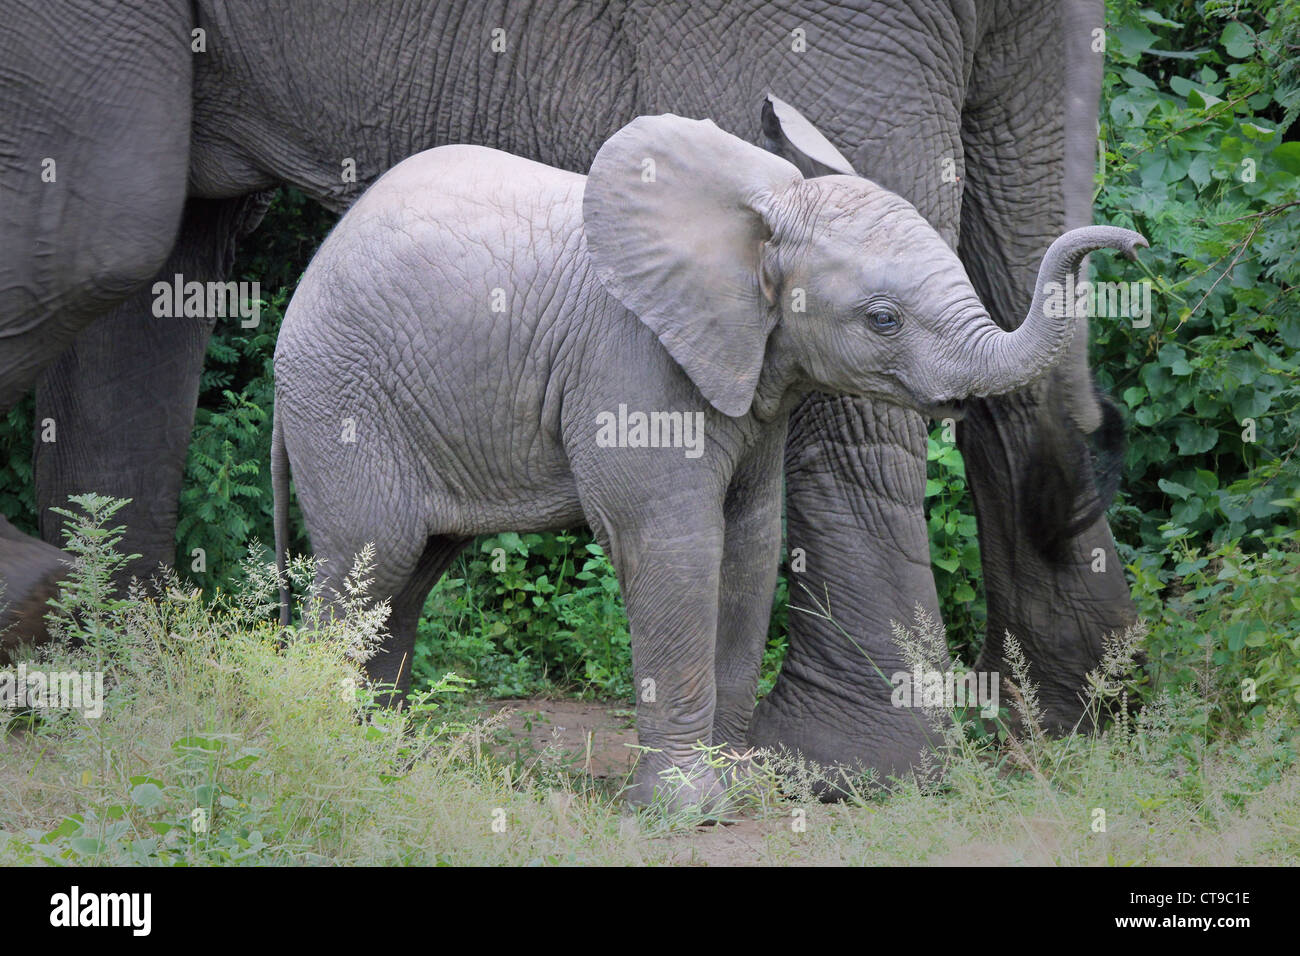 An extremely cute and WILD baby African Elephant stays close to mom for protection in Uganda, Africa. Stock Photo